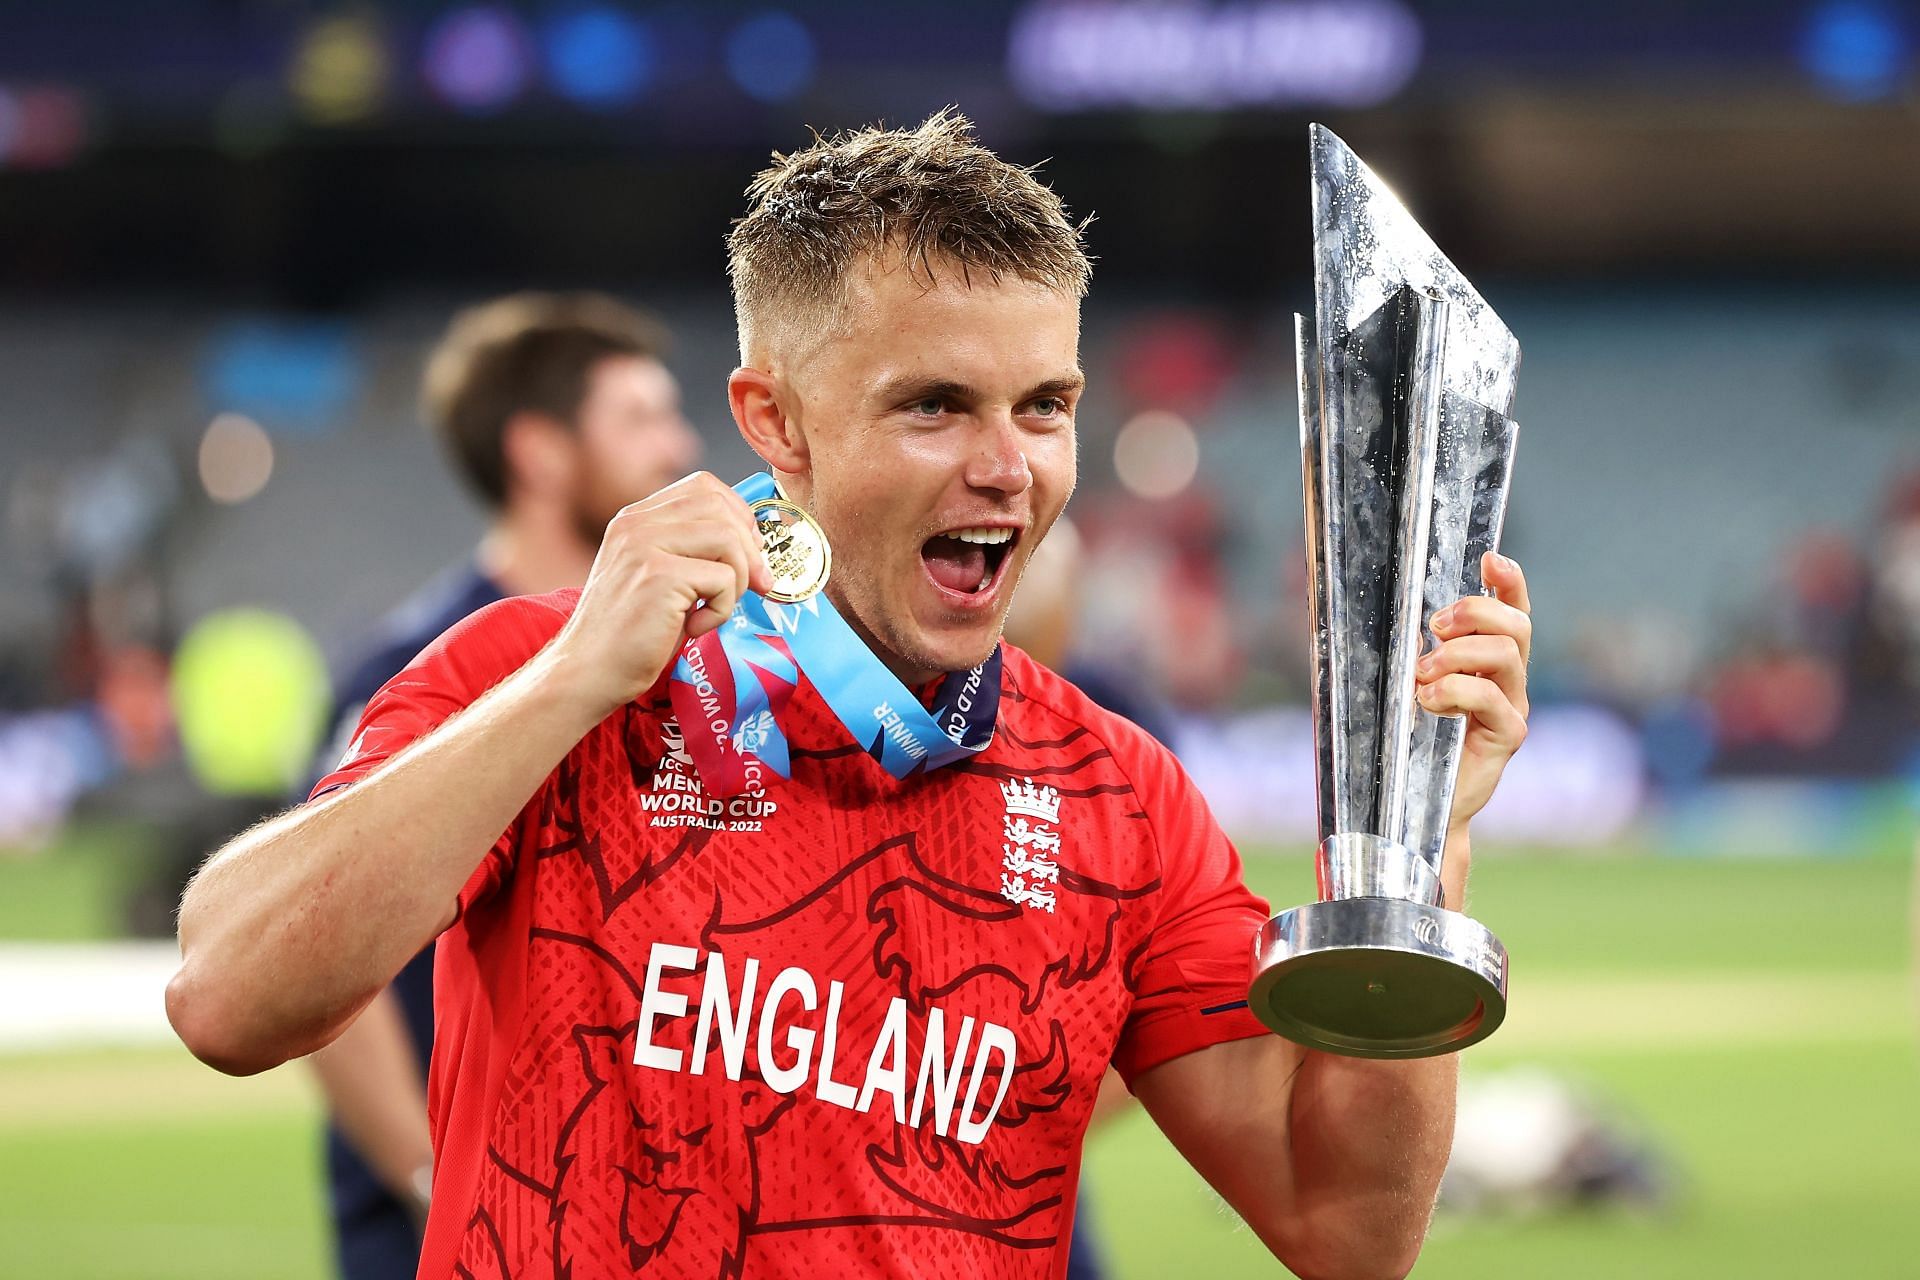 England are the defending champions of the T20 World Cup.